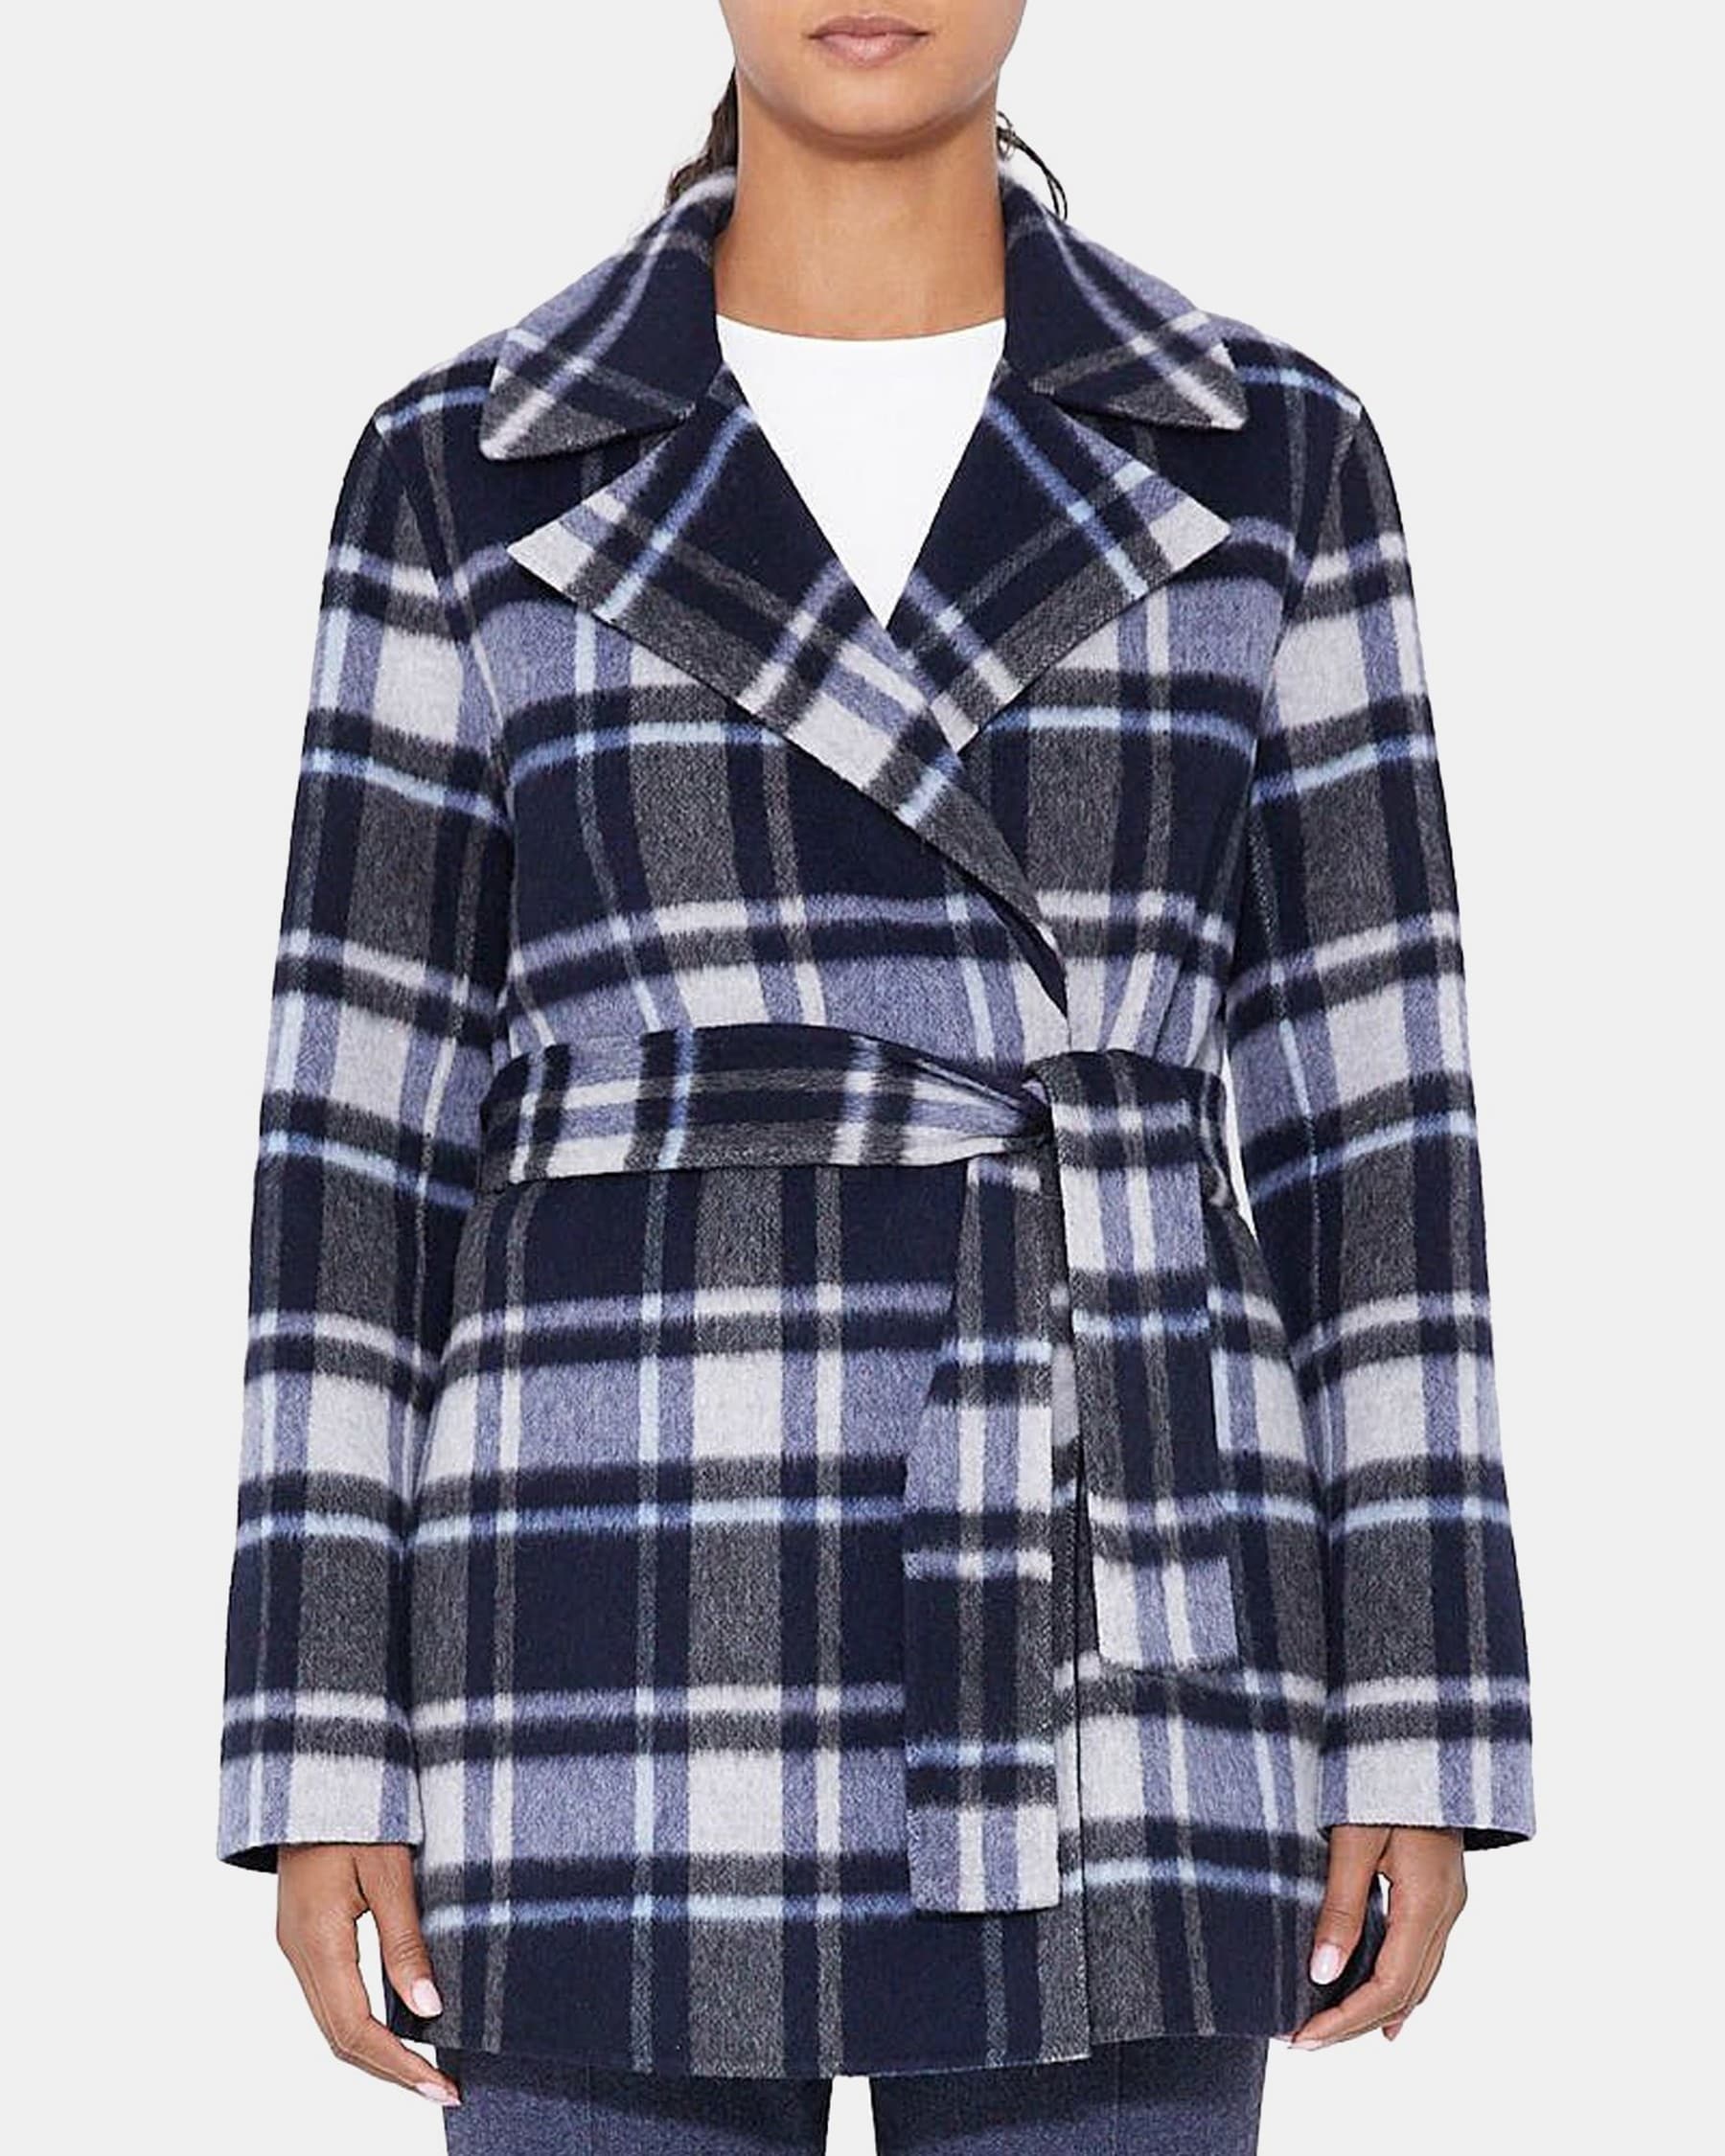 Theory Belted Wrap Coat in Plaid Wool-Blend